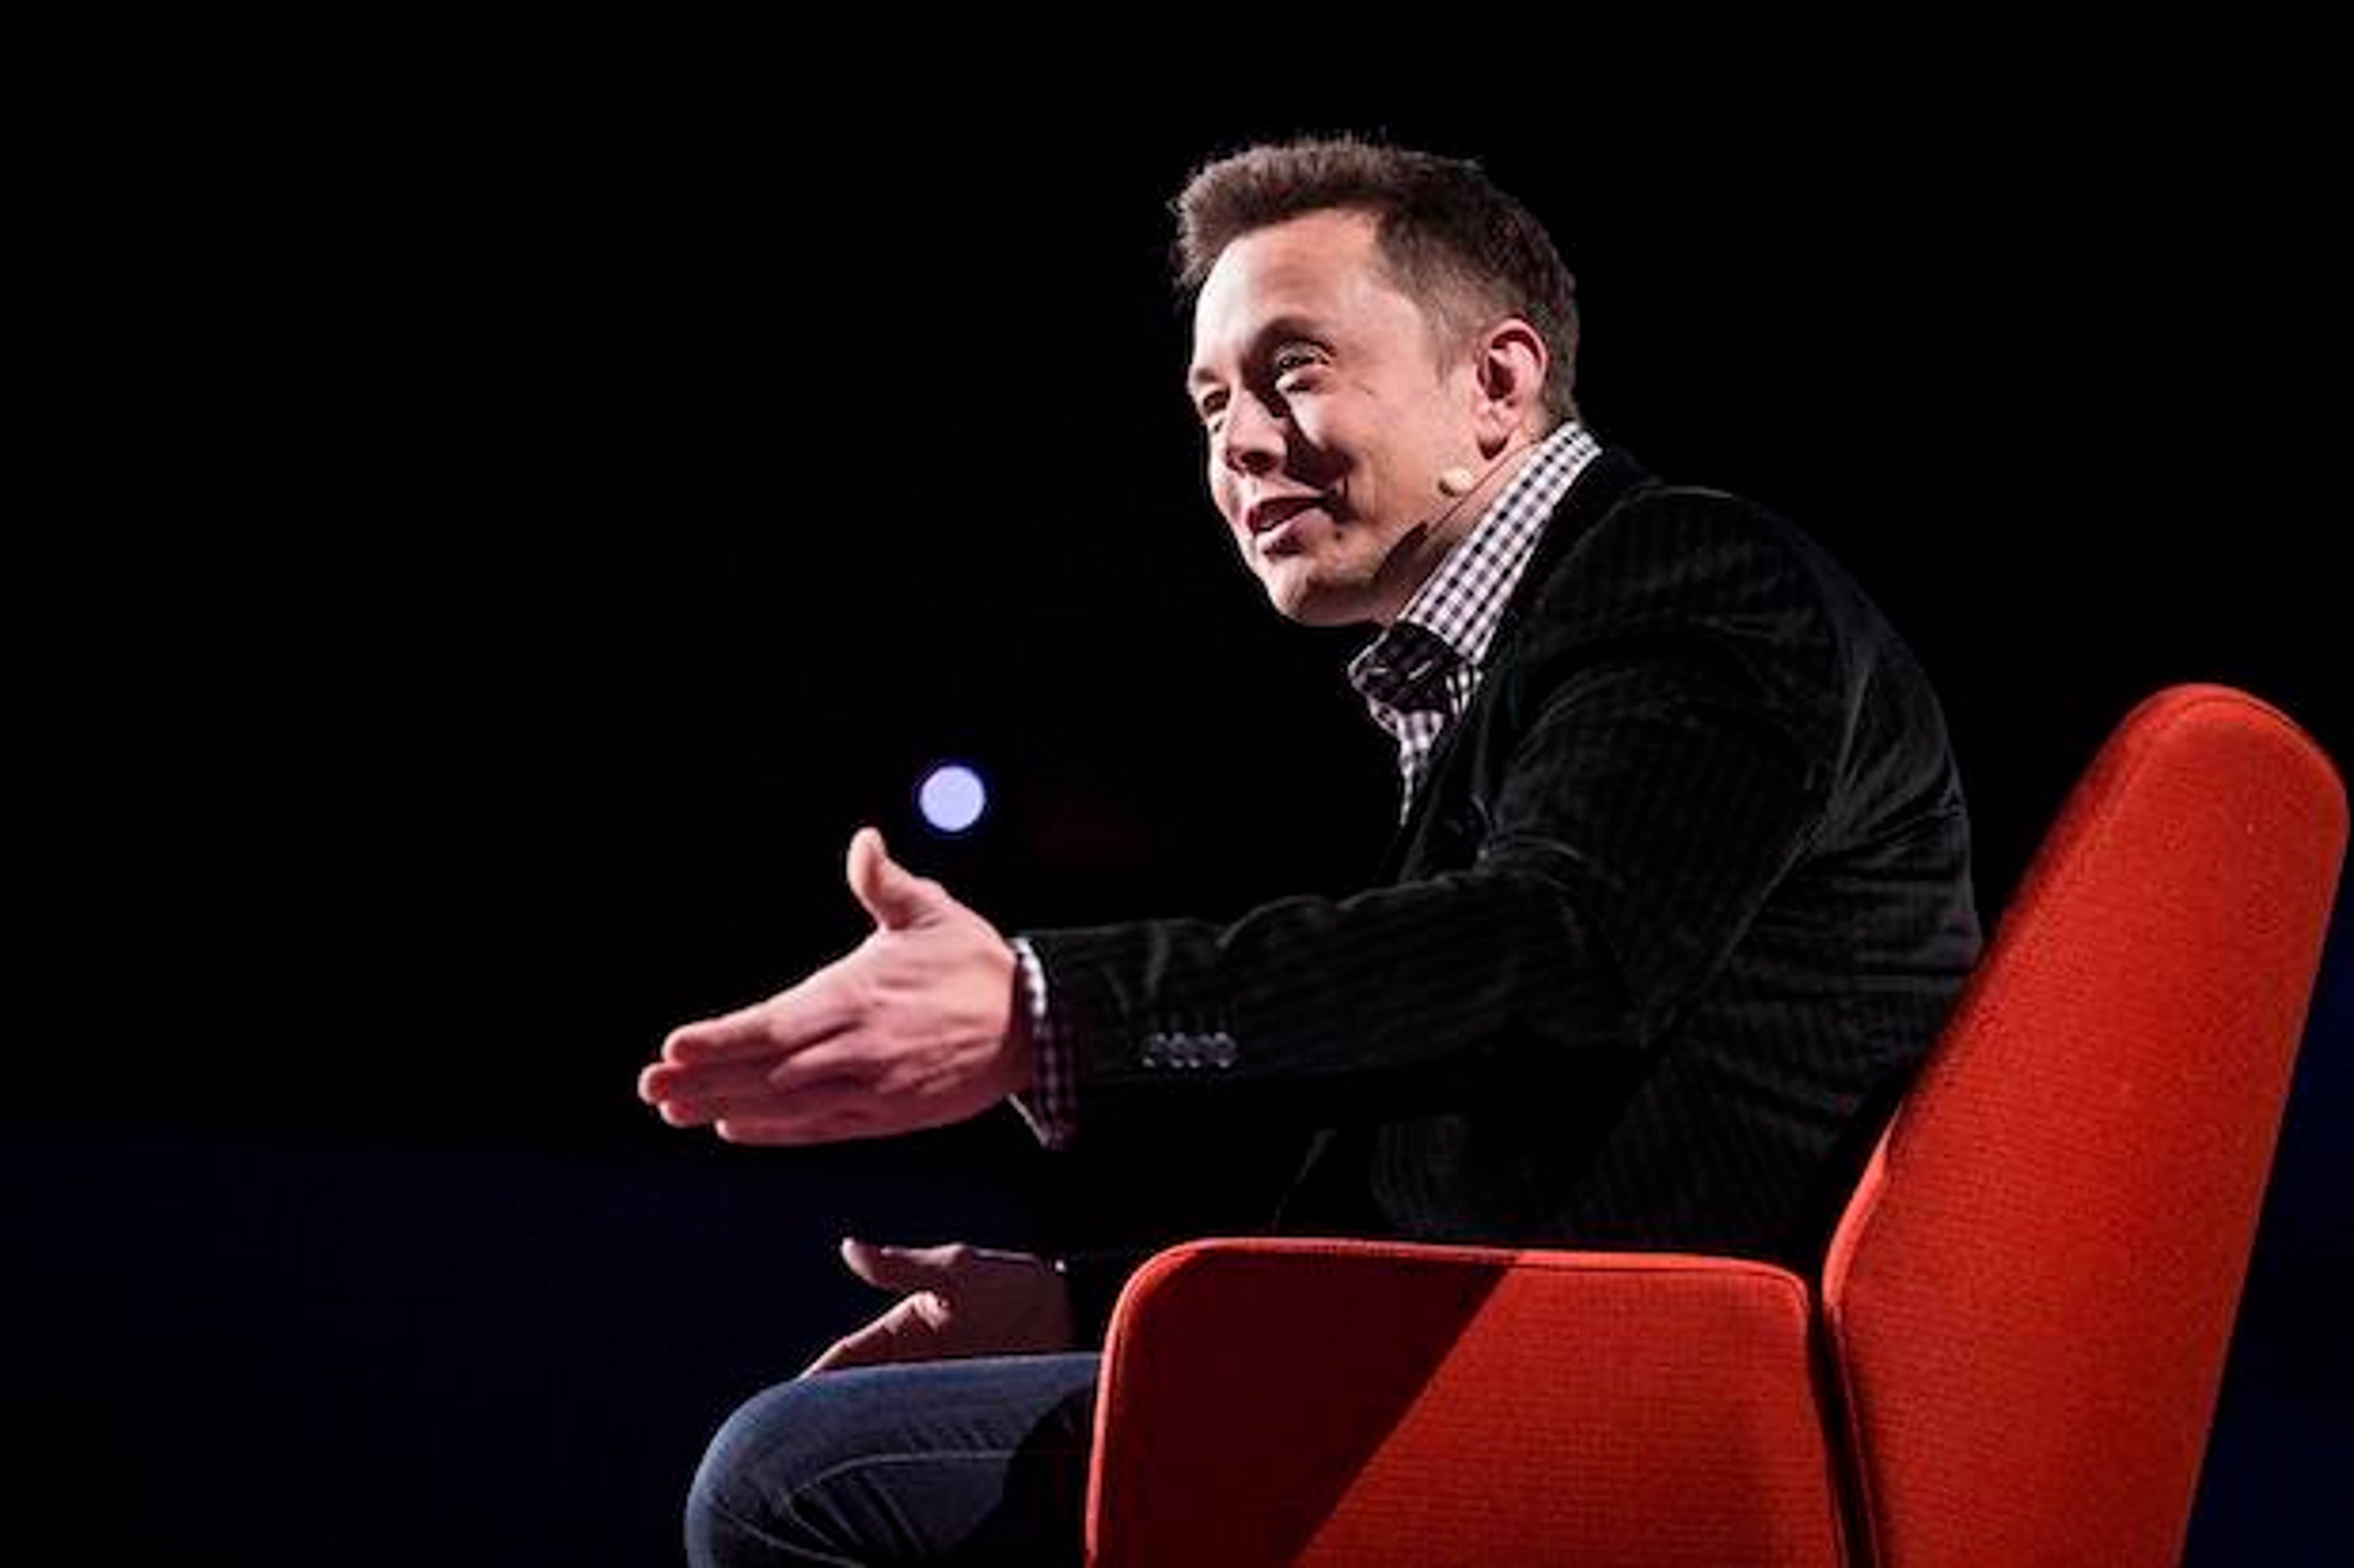 Tesla Founder Elon Musk Not Alone in his Vision for Psychedelics